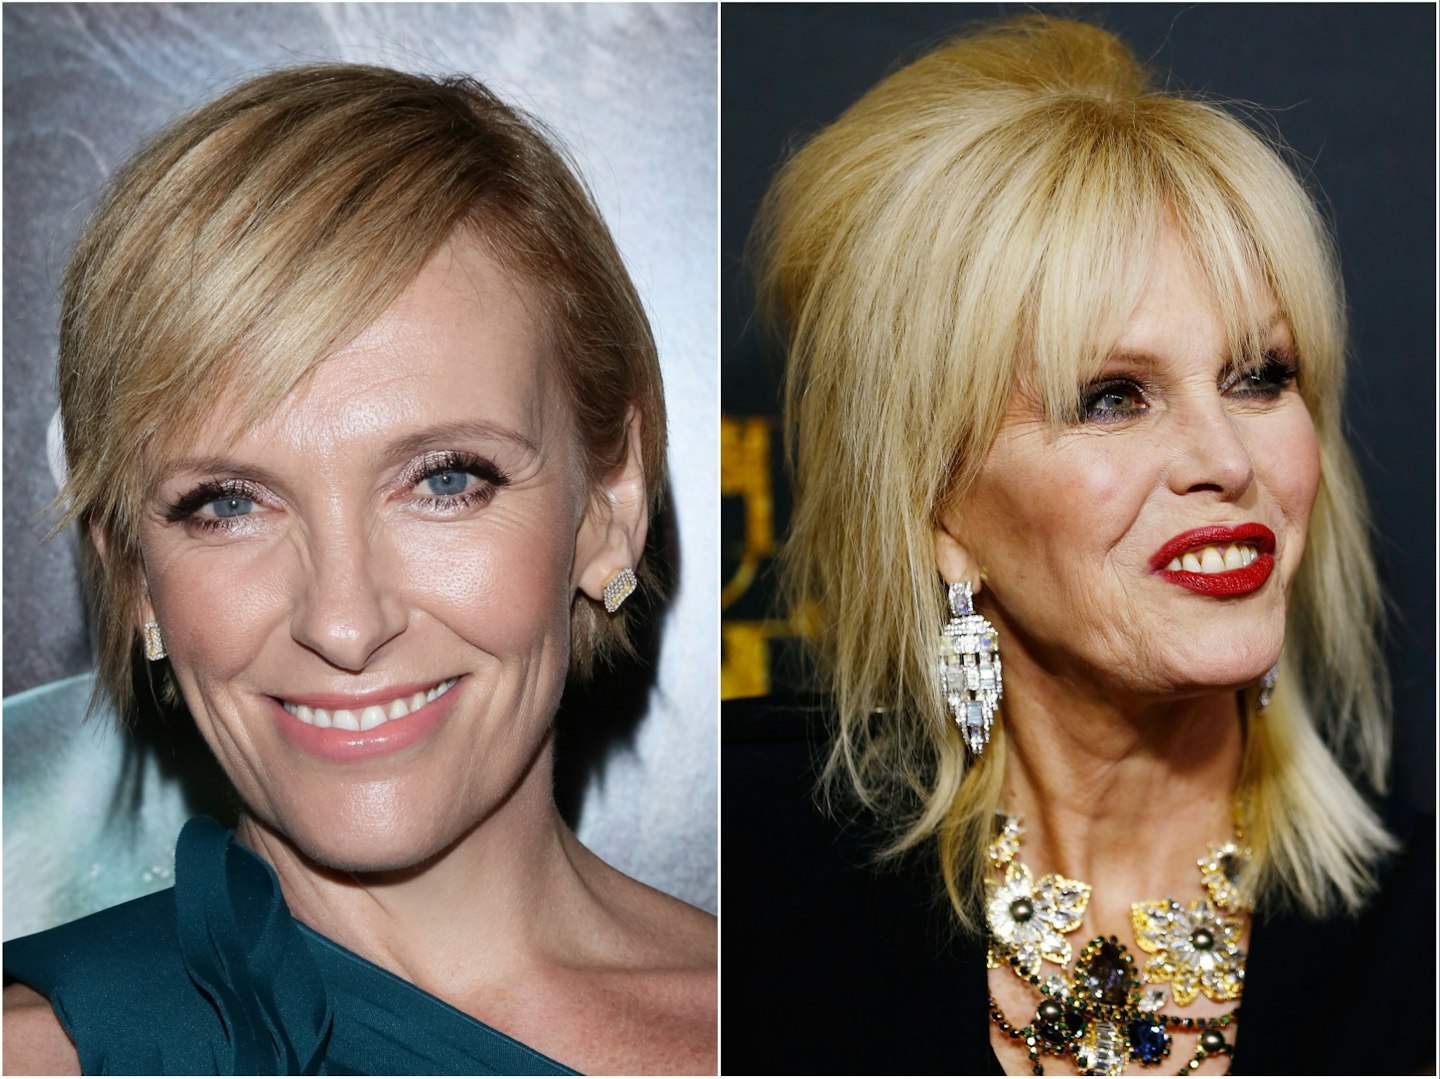 Toni Collette and Joanna Lumley